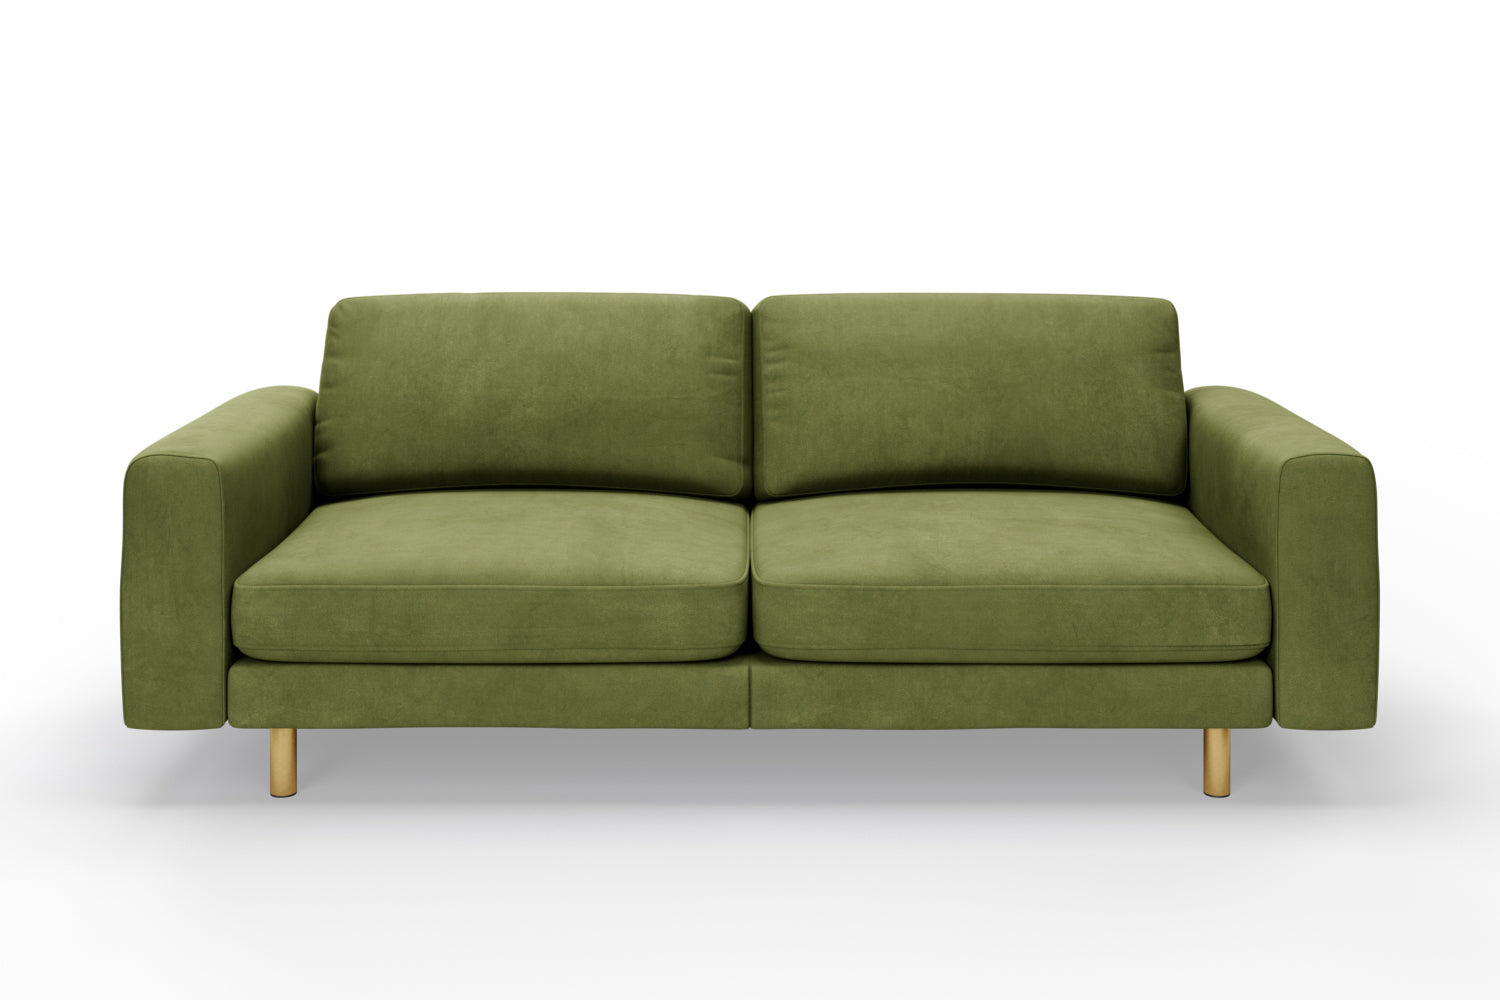 SNUG | The Big Chill 3 Seater Sofa in Olive variant_40502666821680